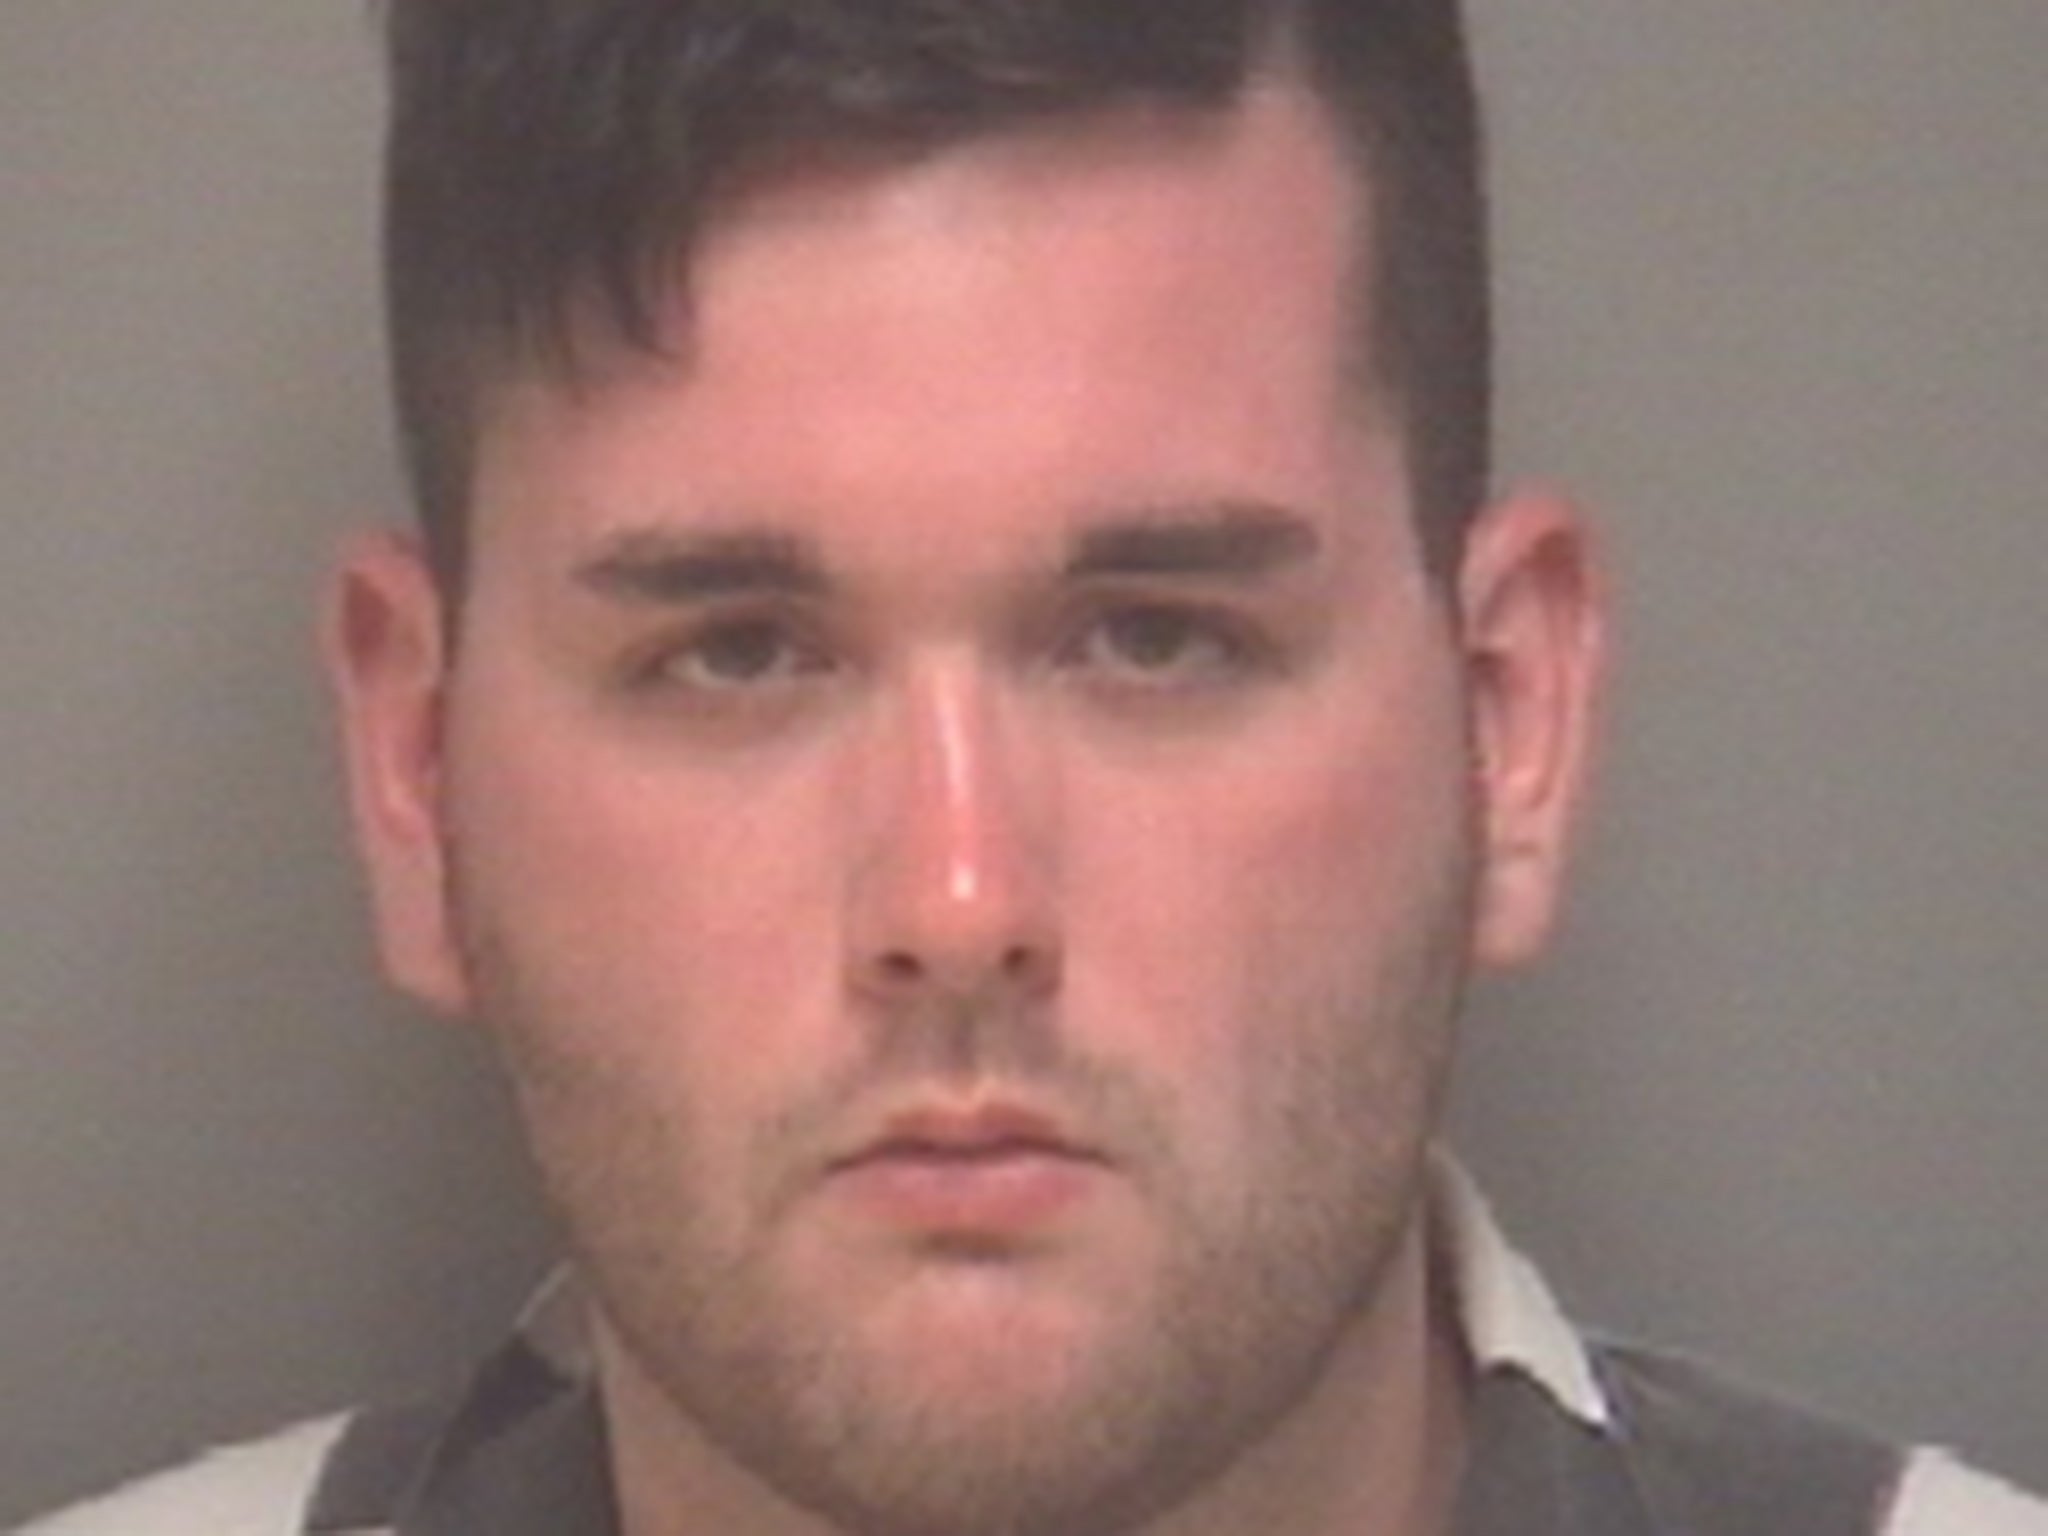 In this handout provided by Albemarle-Charlottesville Regional Jail, James Alex Fields Jr. of Maumee, Ohio poses for a mugshot after he allegedly drove his car into a crowd of counter-protesters killing one and injuring 35 on August 12, 2017 in Charlottesville, Virginia. (Photo by Albemarle-Charlottesville Regional Jail via Getty Images)